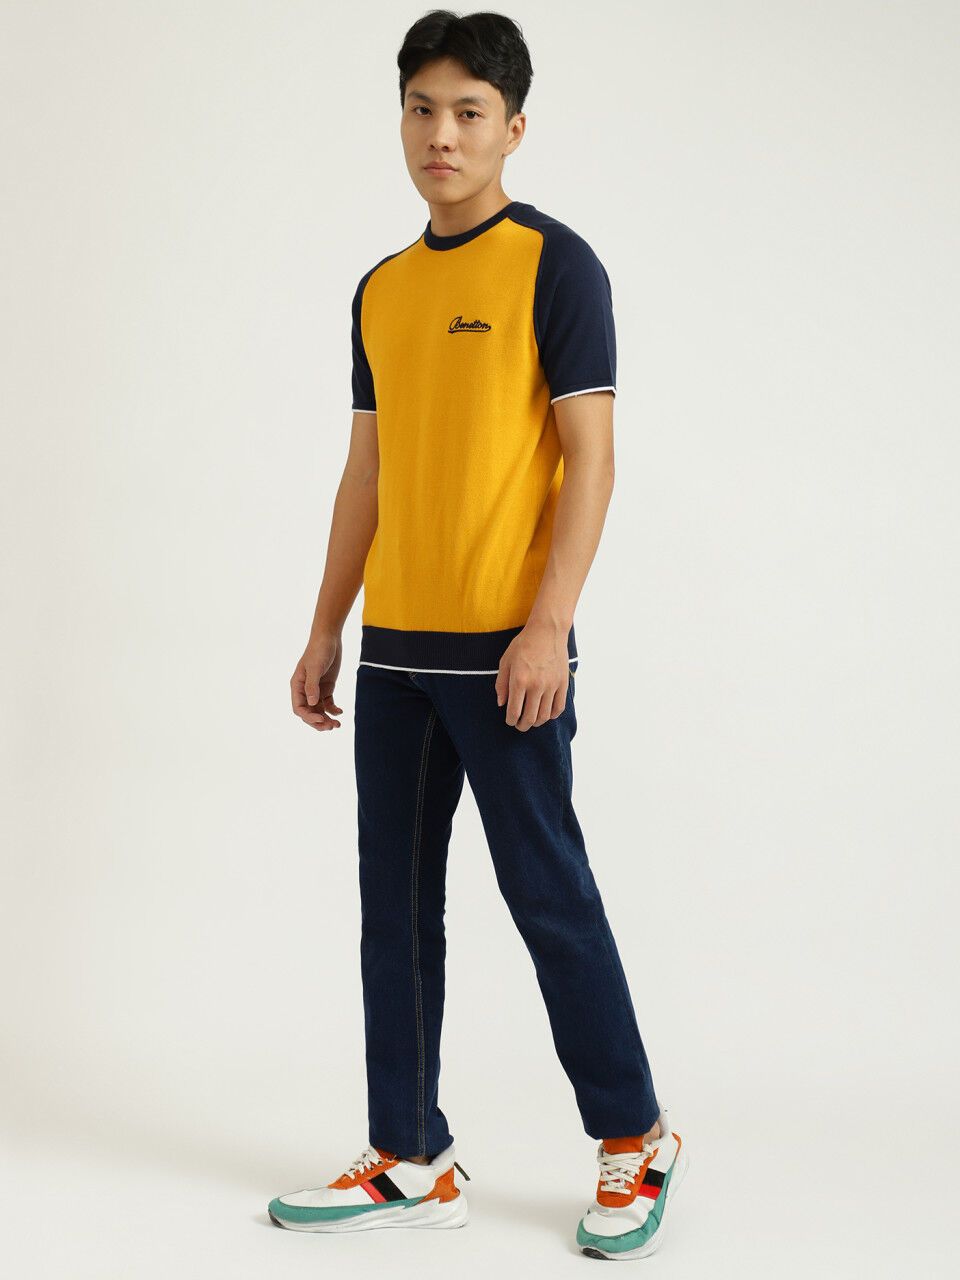 Yellow And Navy Blue T-Shirt